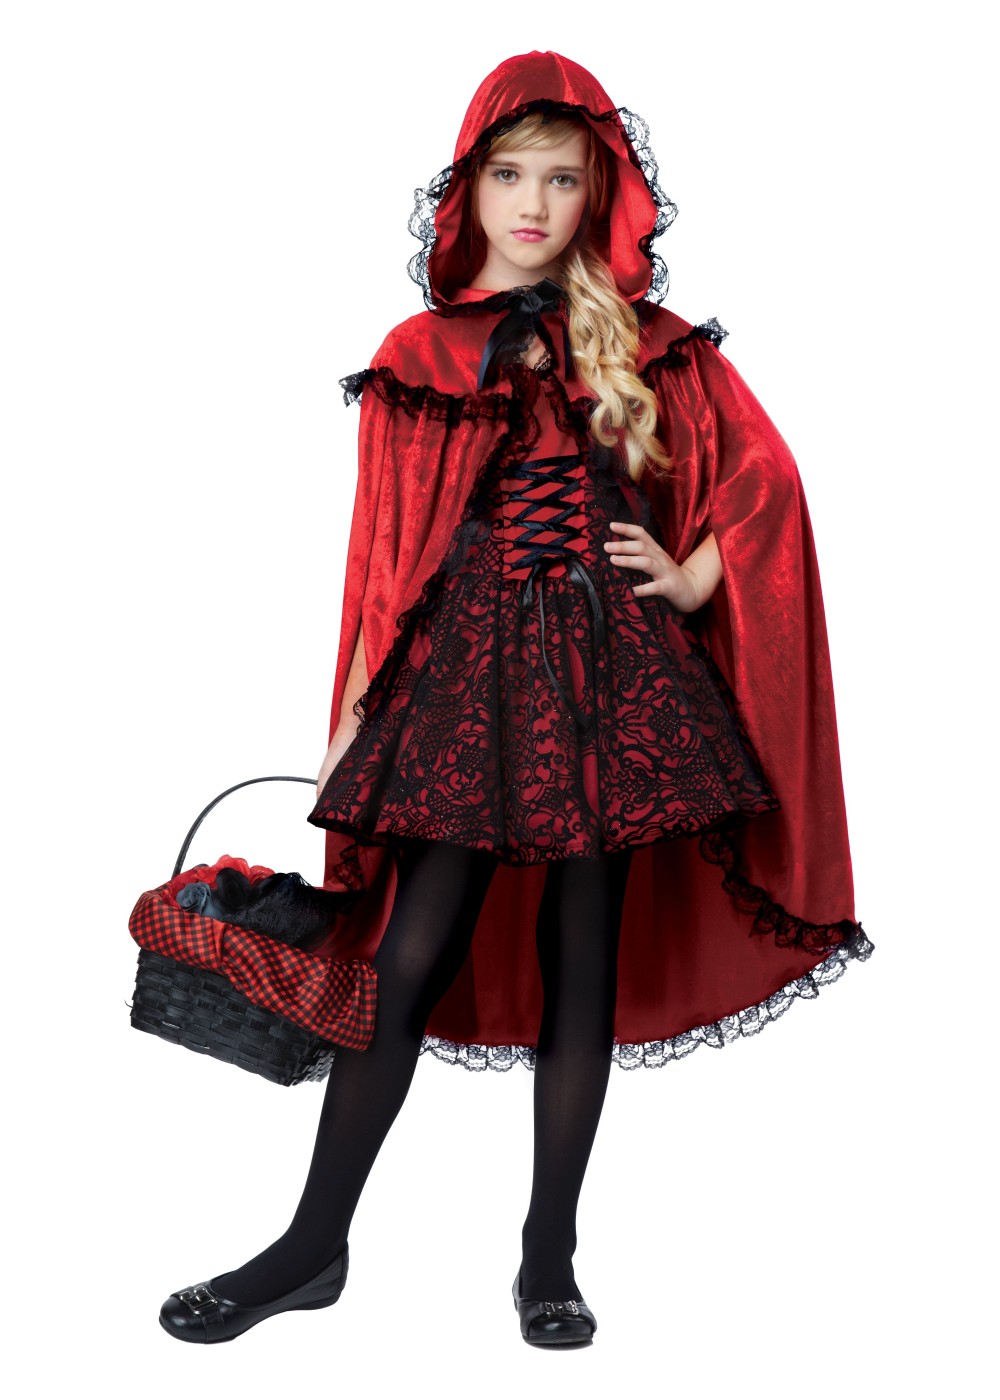 Kids Red Riding Hood Girls Costume Deluxe